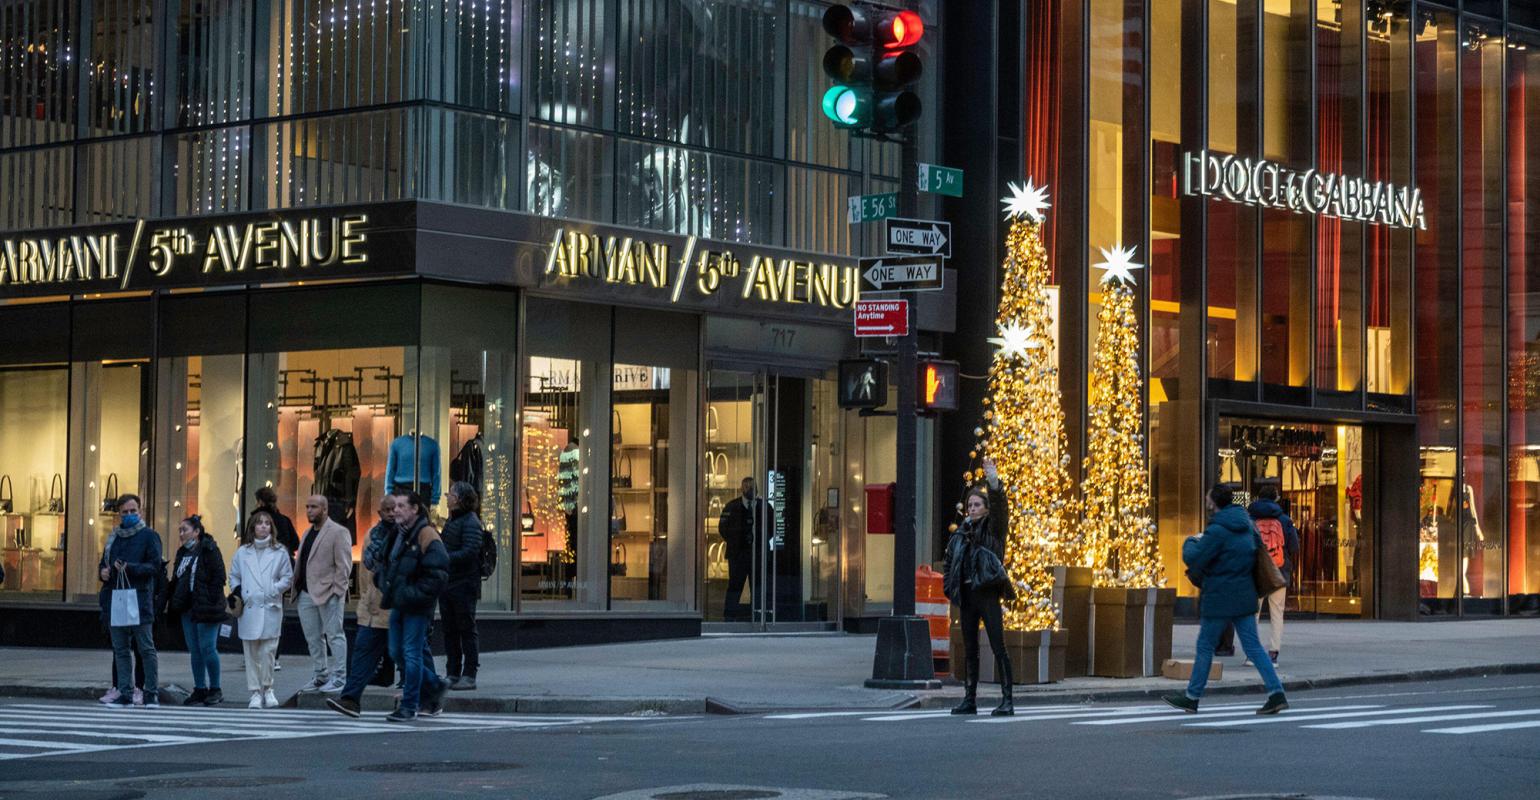 Live: Shopping on 5th Avenue, New York 